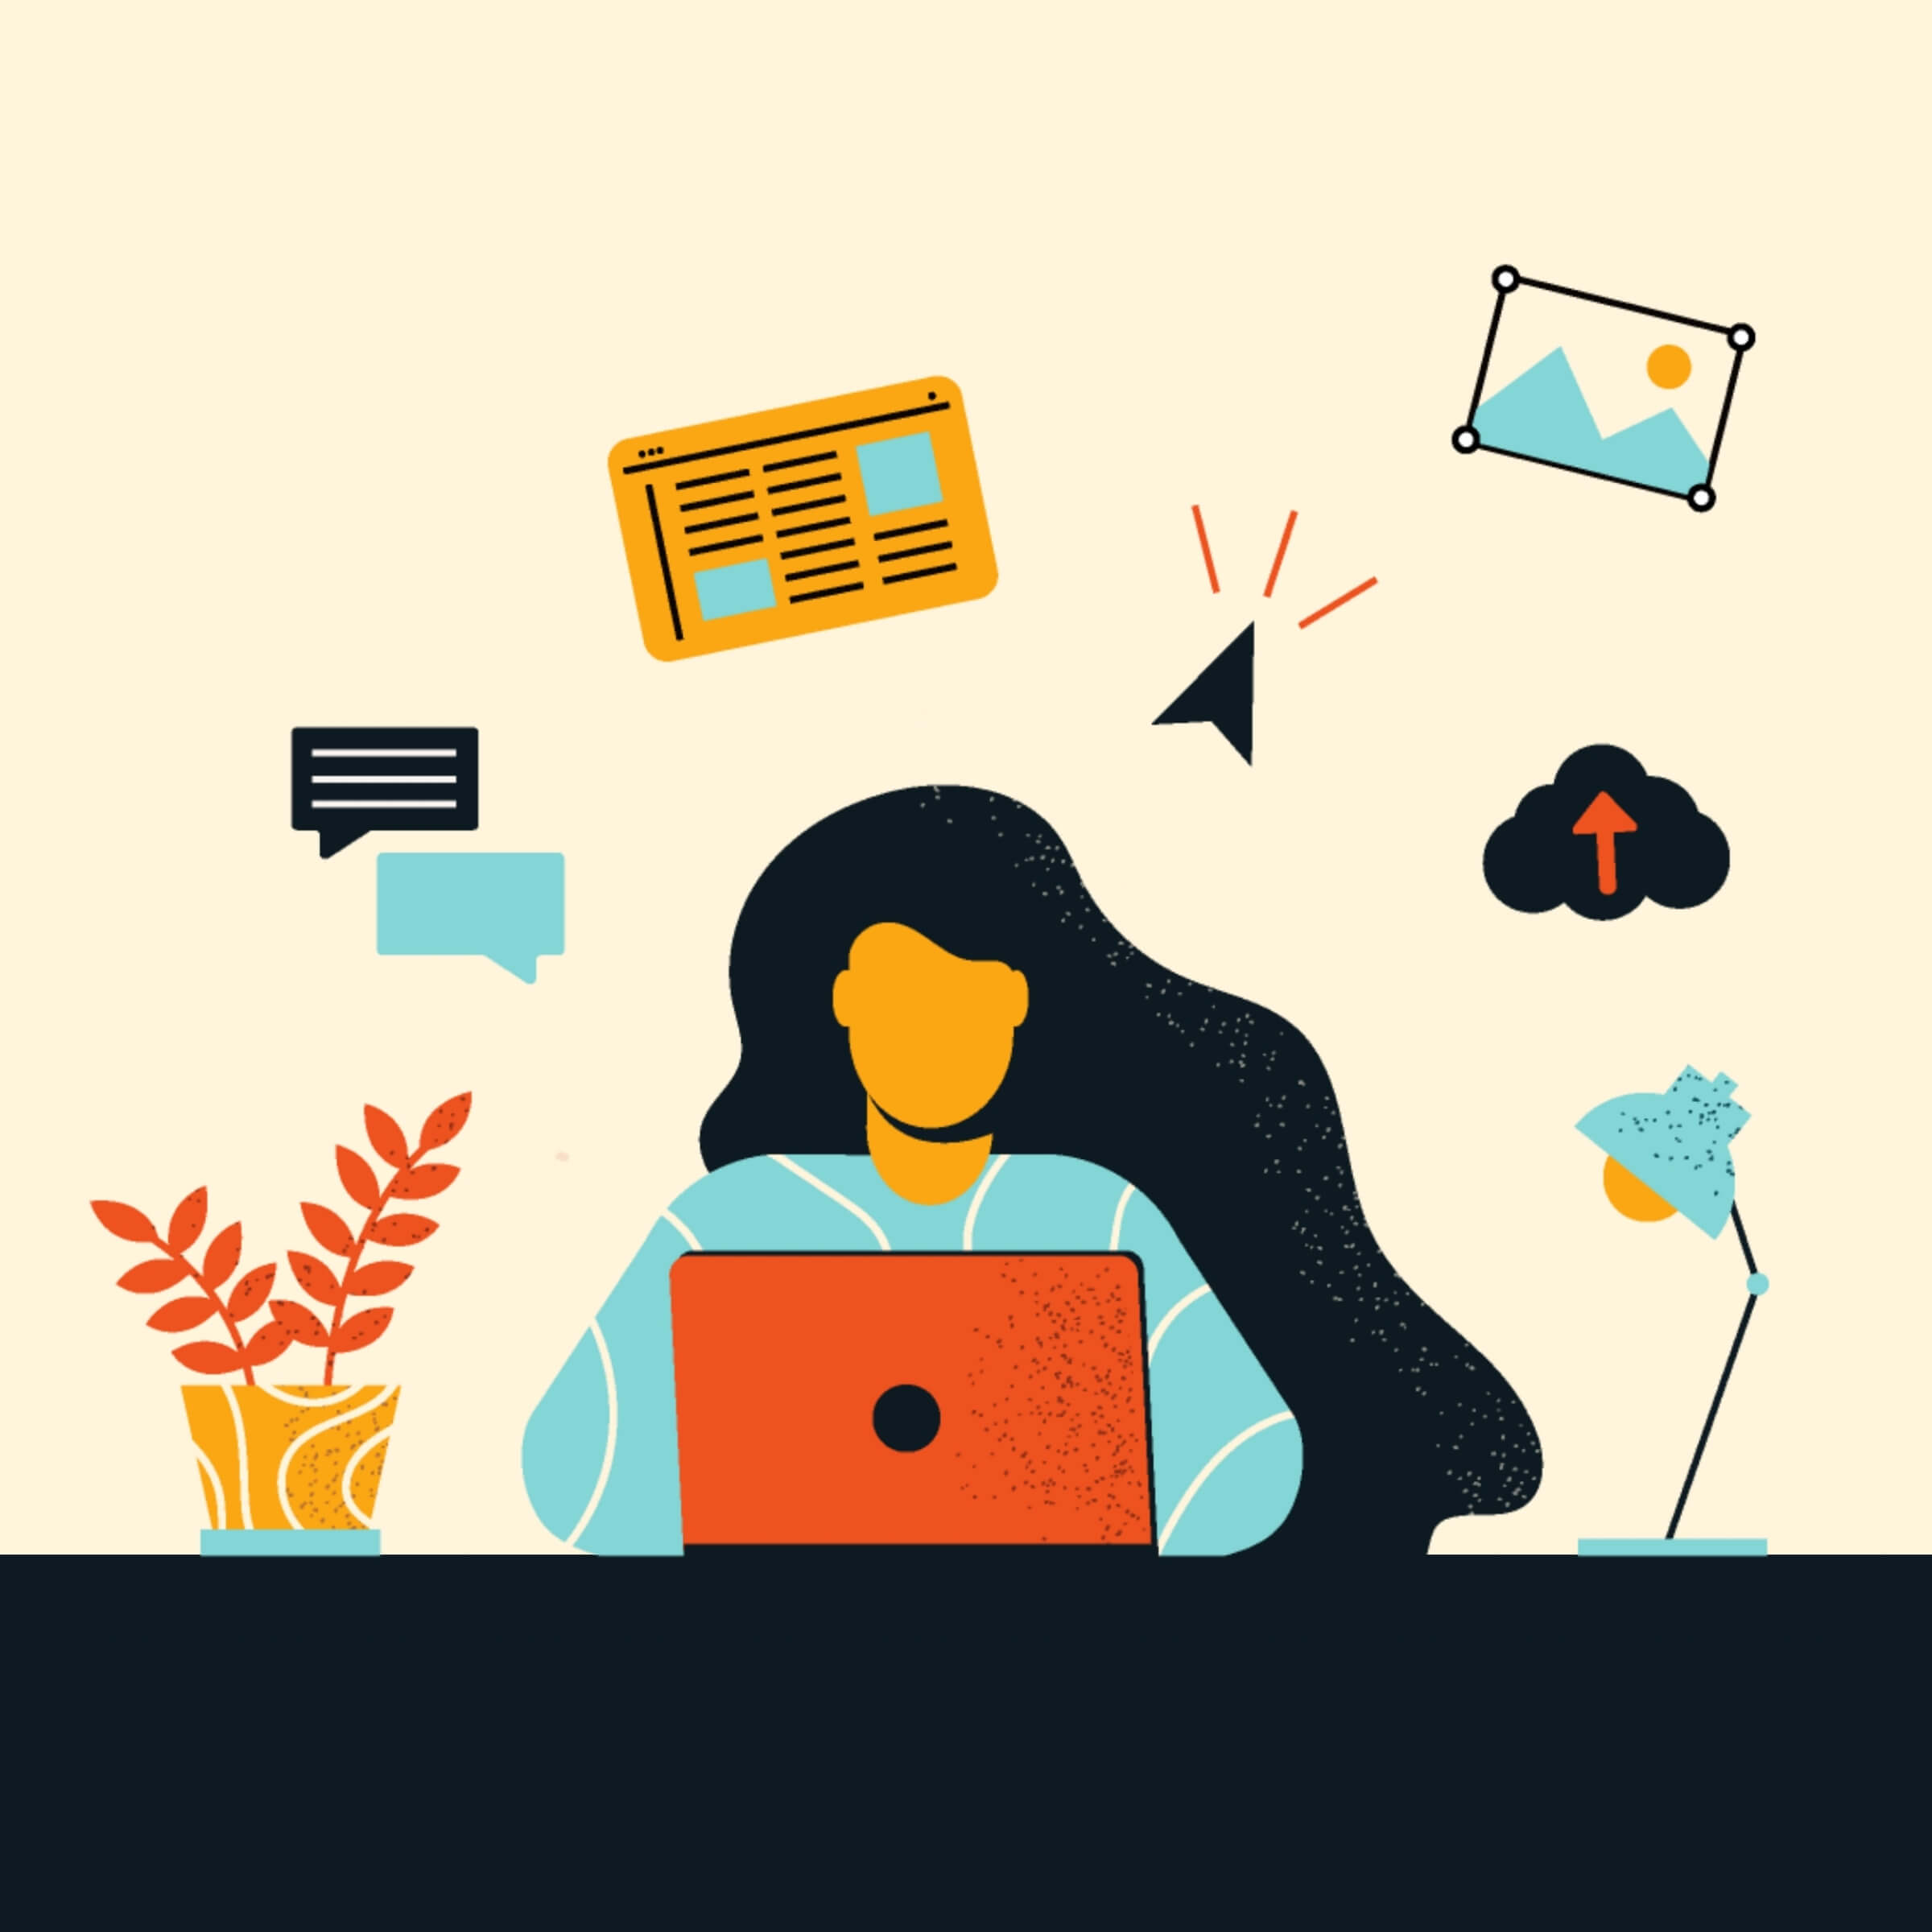 Flat illustration of a woman working on a laptop